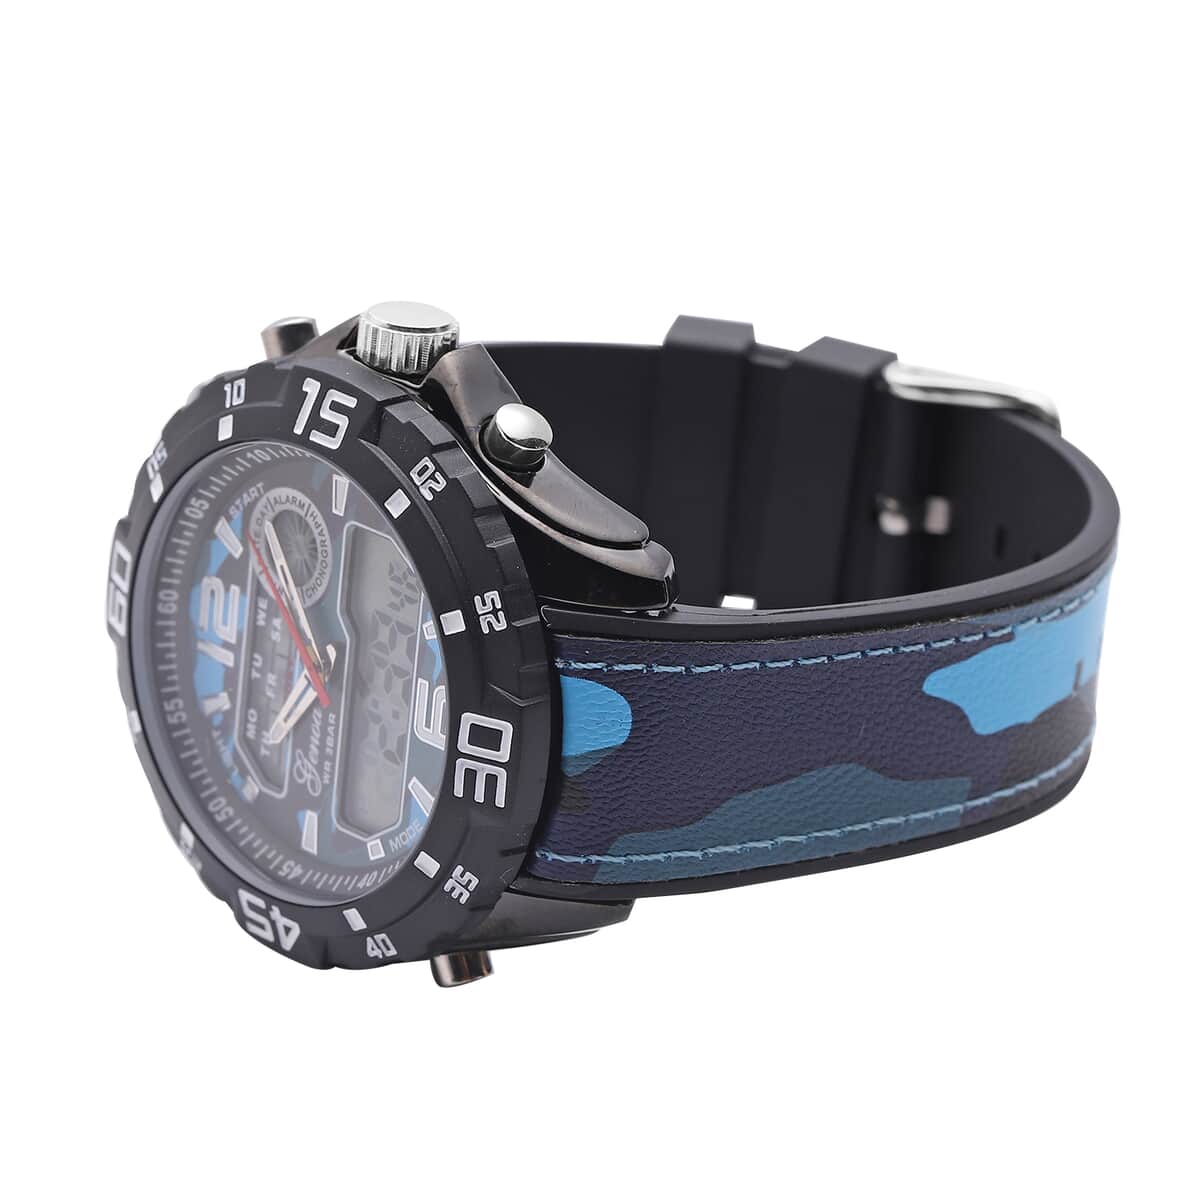 Genoa Japanese and Electronic Movement Multifunctional Key Watch with Camouflage Blue Silicone Strap image number 3